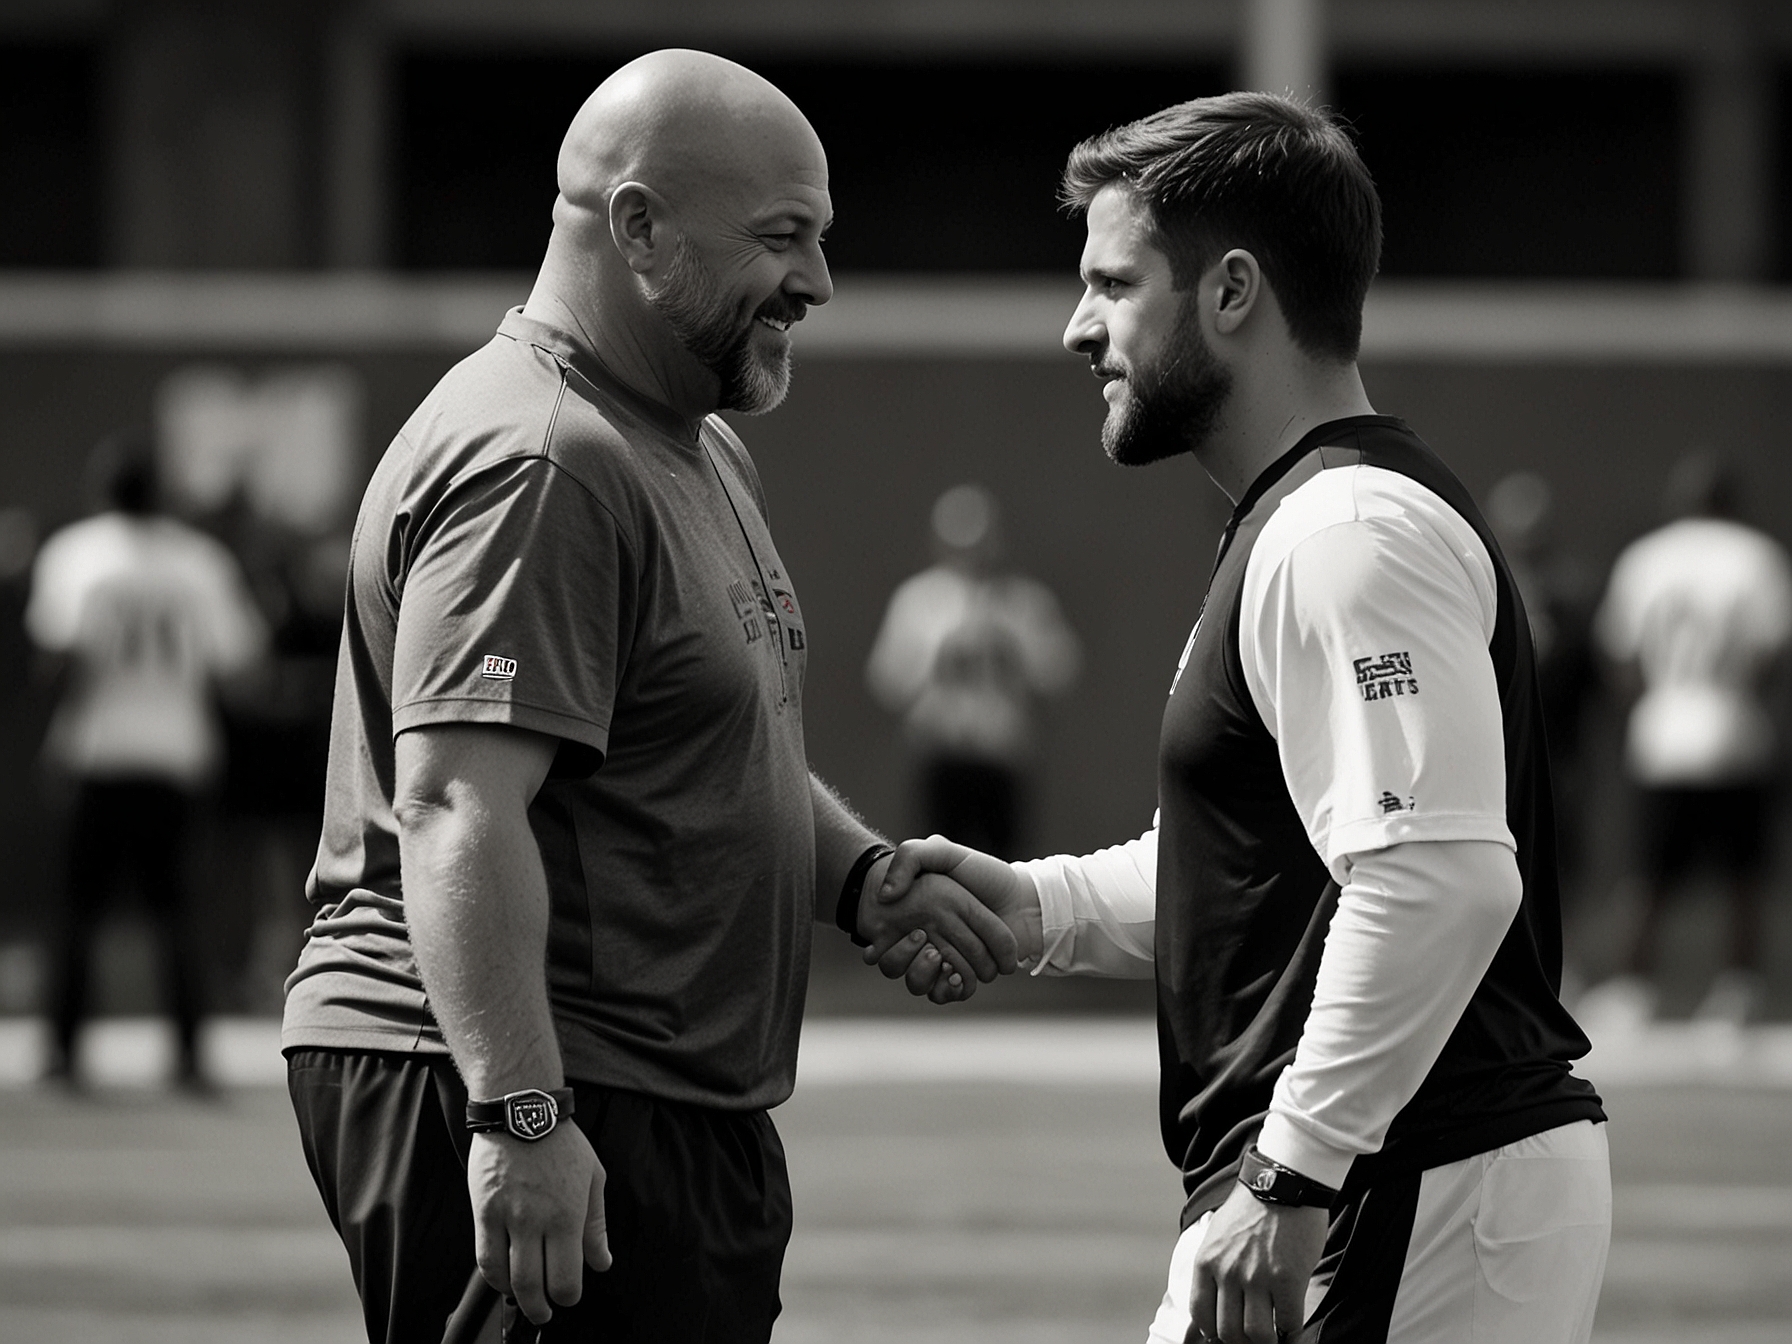 New York Giants' head coach Brian Daboll shaking hands with Jacob Saylors during a training session, symbolizing Saylors' integration into the team's offensive schemes and the new dynamic he brings.